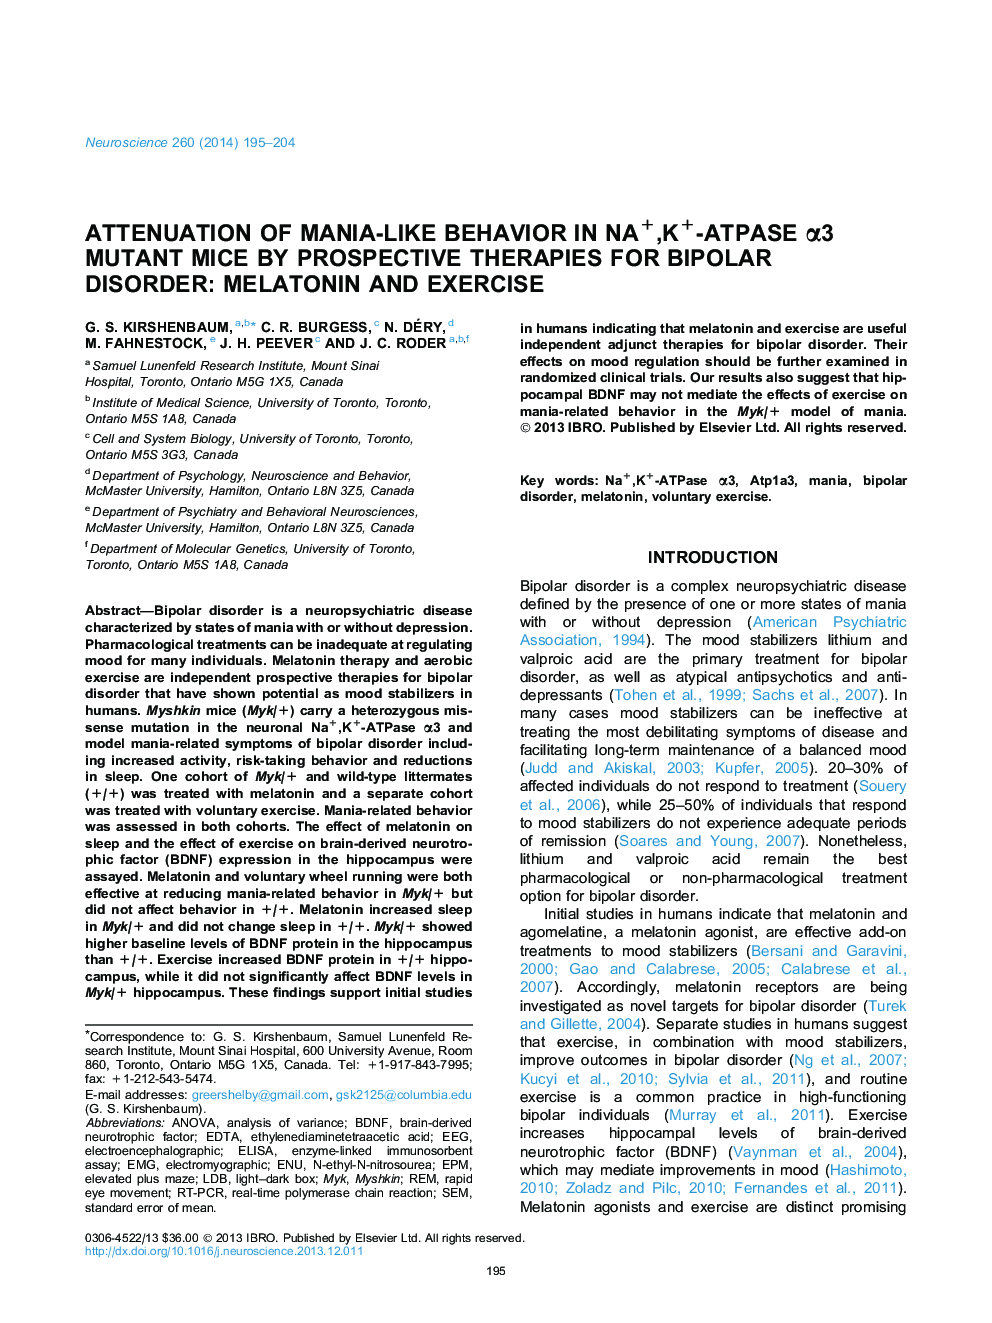 Attenuation of mania-like behavior in Na+,K+-ATPase Î±3 mutant mice by prospective therapies for bipolar disorder: Melatonin and exercise